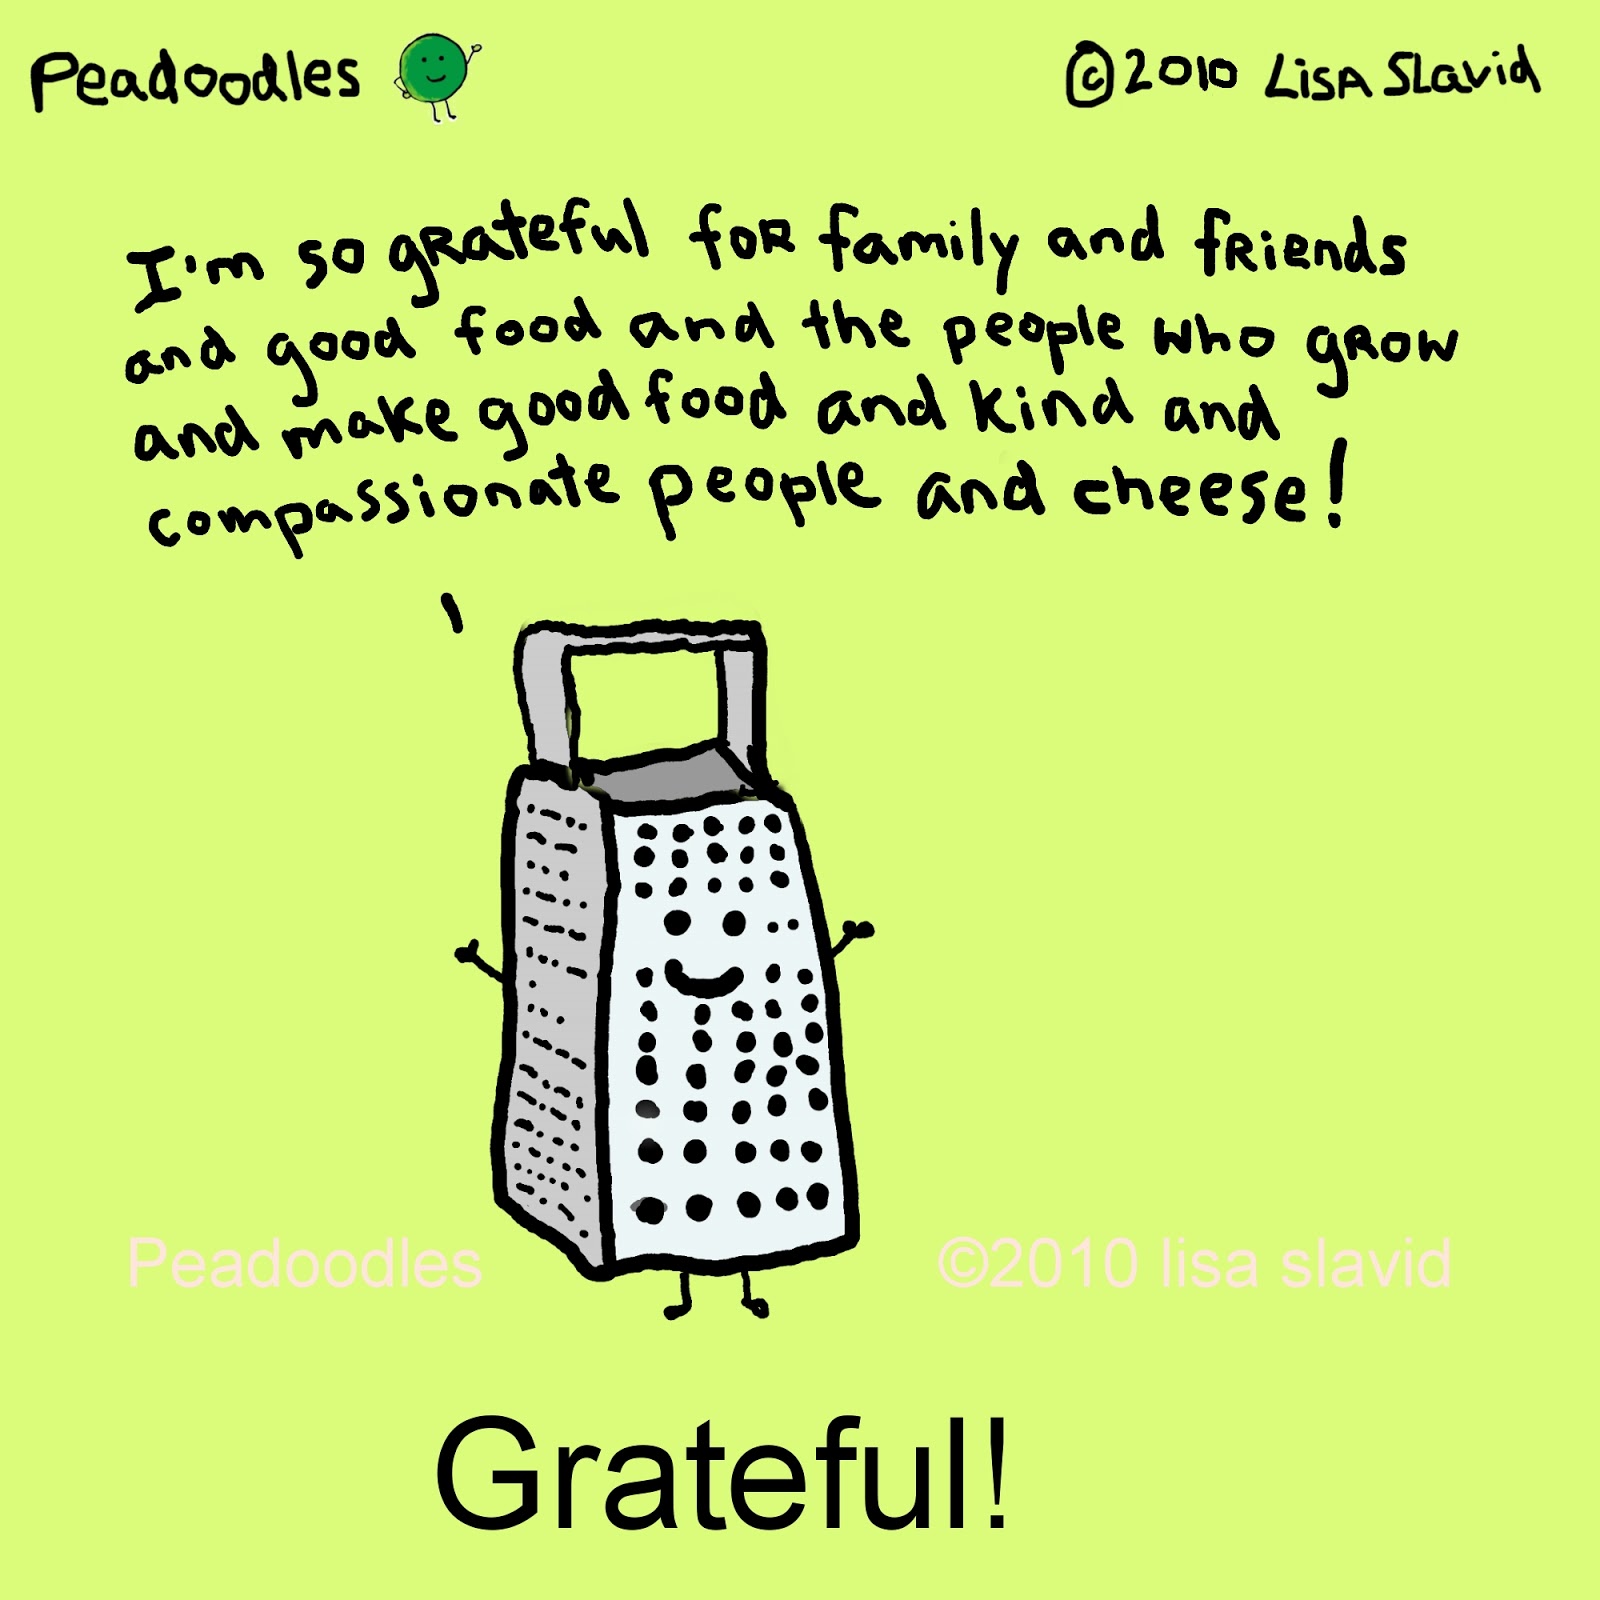 A cartoon cheese grater says: I am so grateful for family and friends and good food and the people who grow and make good food and kind and compassionate people and cheese!